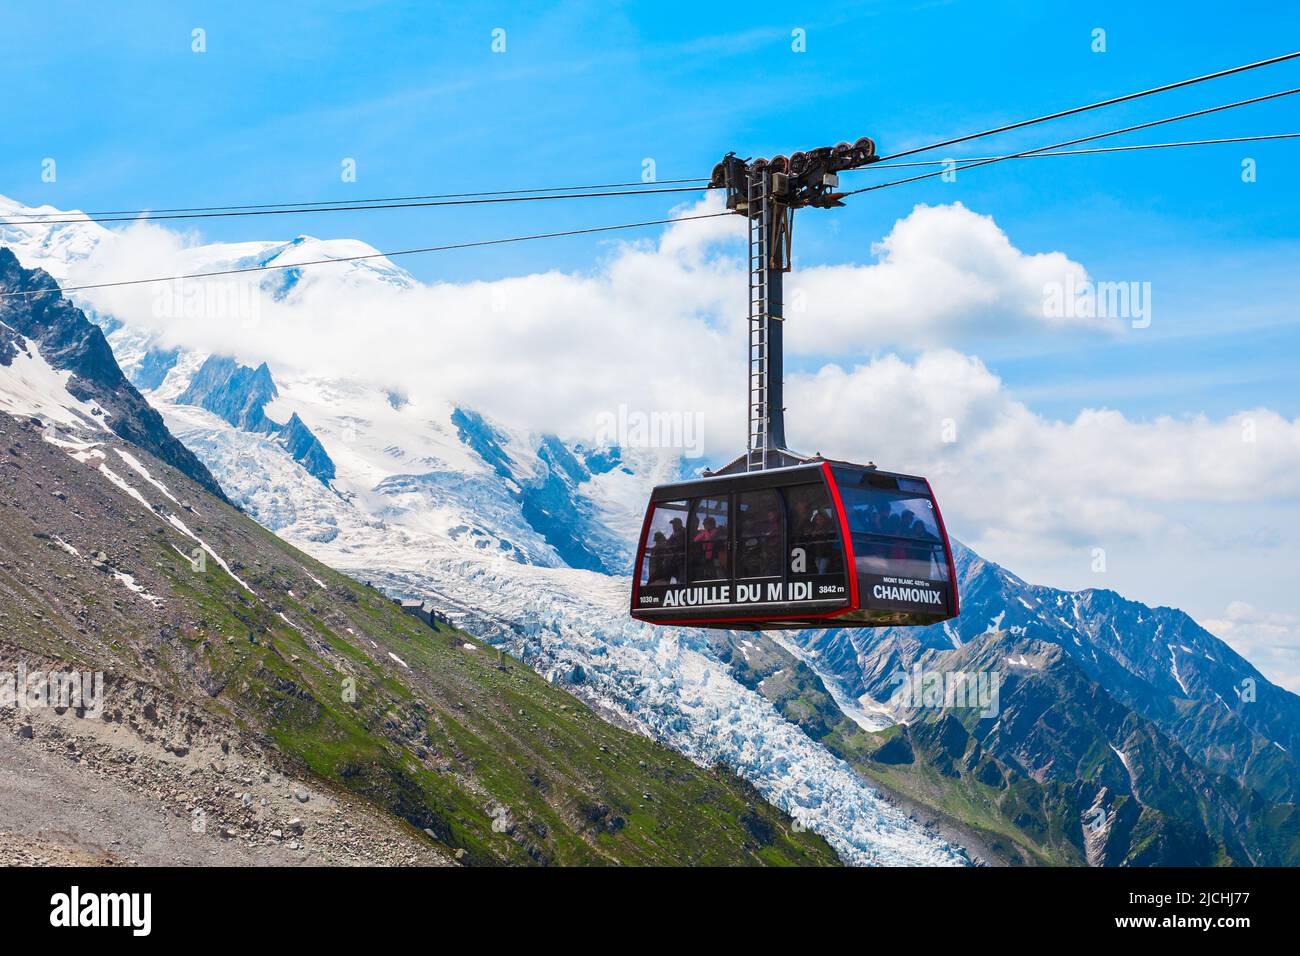 CHAMONIX, FRANCE - JULY 18, 2019: Cable car coach going to the Aiguille du Midi 3842 m mountain in the Mont Blanc massif in the French Alps near the C Stock Photo